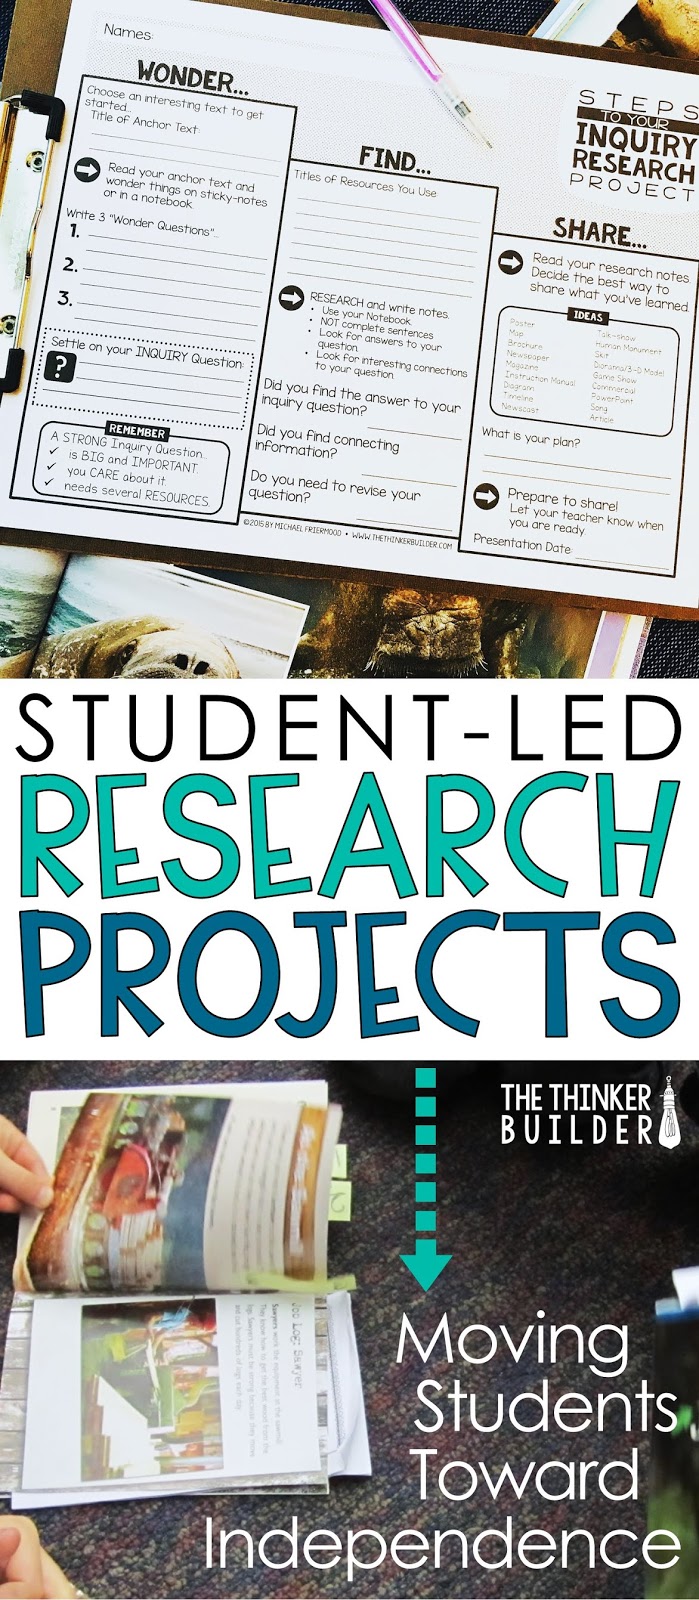 research projects that